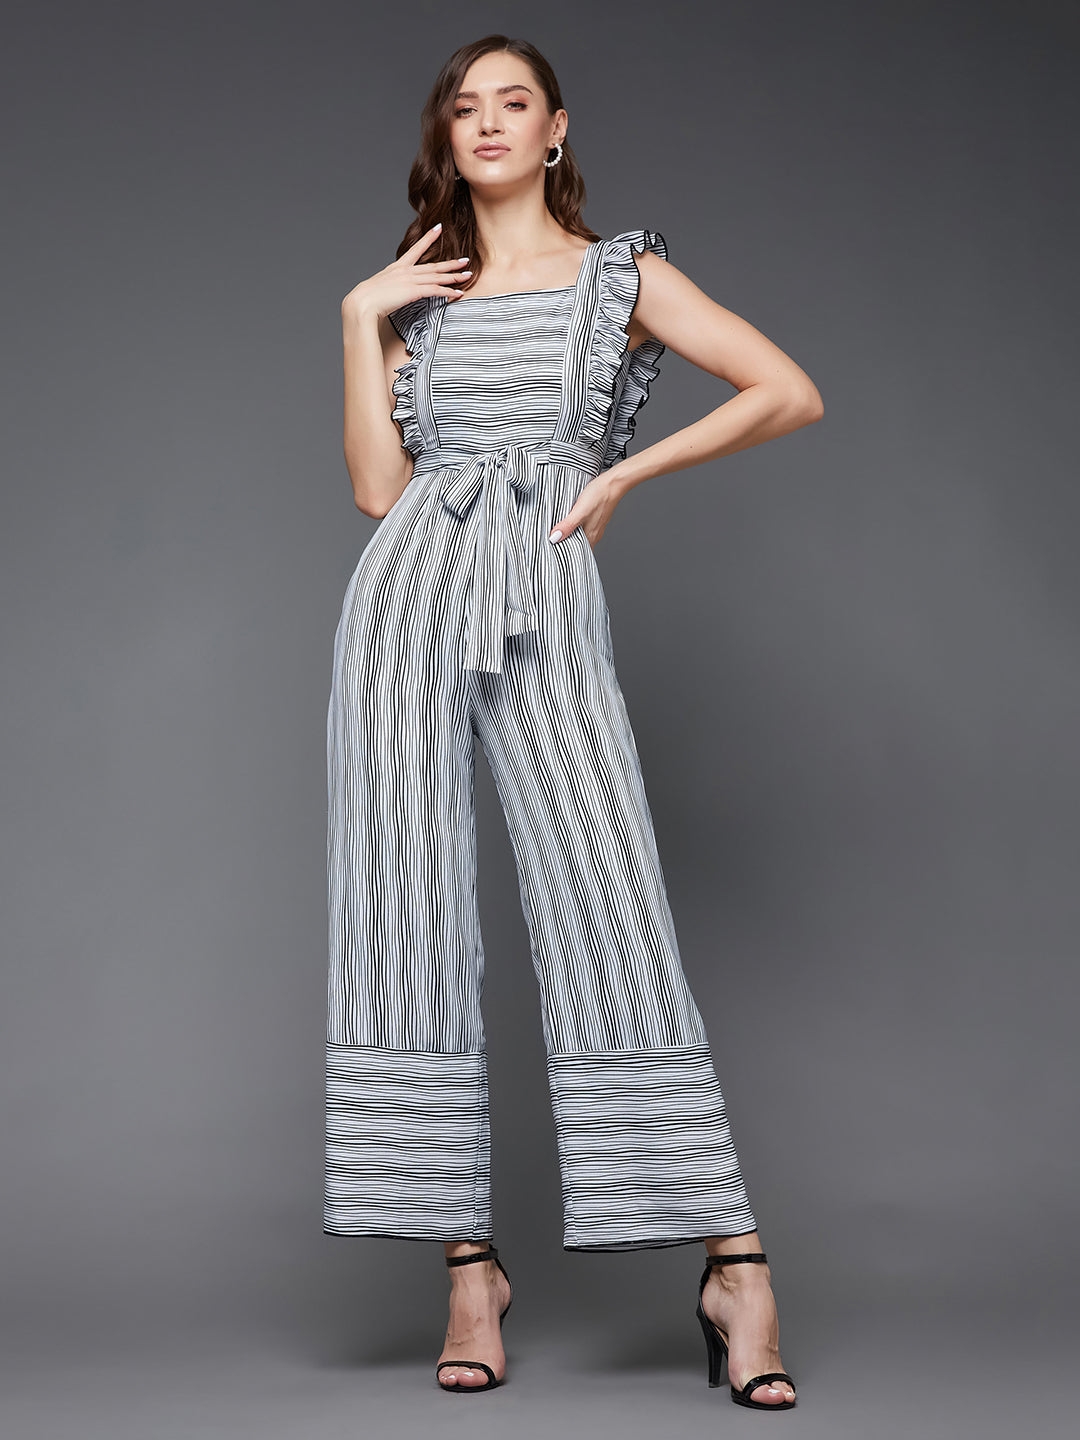 Black and White Striped Square Neck Frilled Crepe Relaxed Fit Tie-Up Regular Jumpsuit